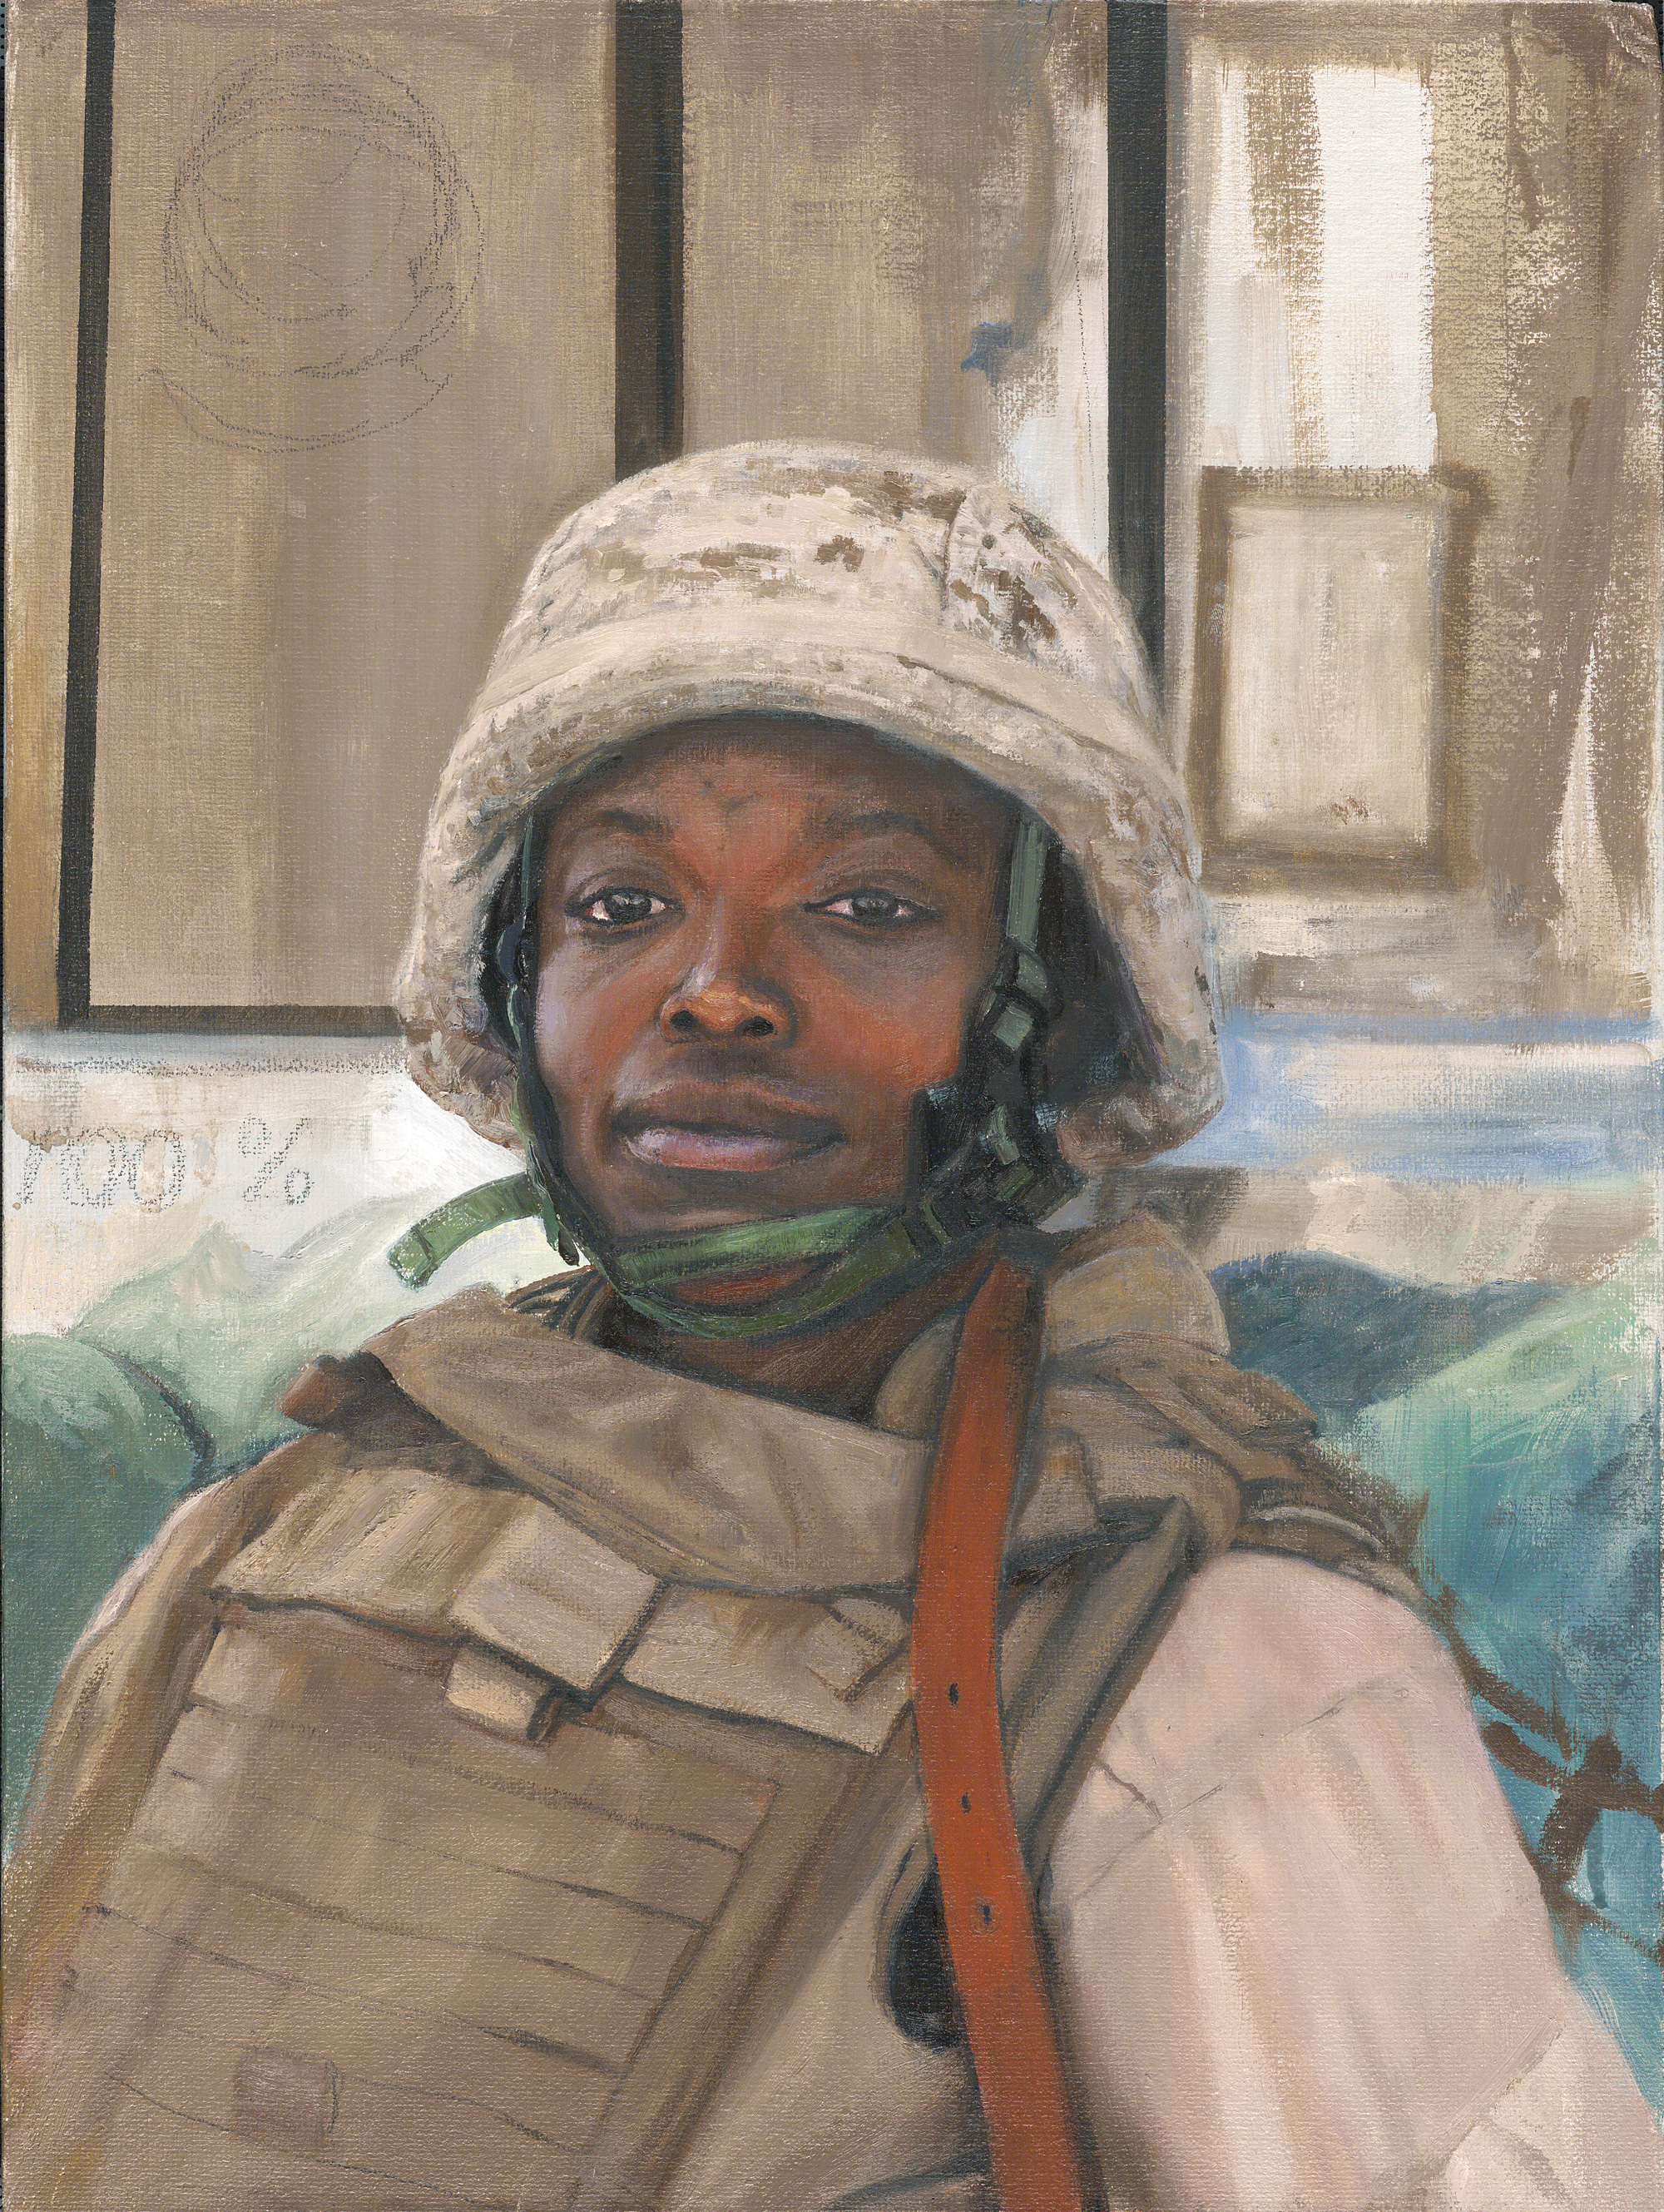 Portrait of Captain Elizabeth Okoreeh-Baah of VMM-263 by Staff Sergeant Kristopher J. Battles, USMCR.  Oil on linen.  Captain Okoreeh-Baah was stationed in Iraq with Marine Medium Tiltrotor Squadron 263 in 2007. She flew CH-46E Sea Knights before moving to MV-22B Osprey, the first female Marine to do so.  CONTRIBUTED